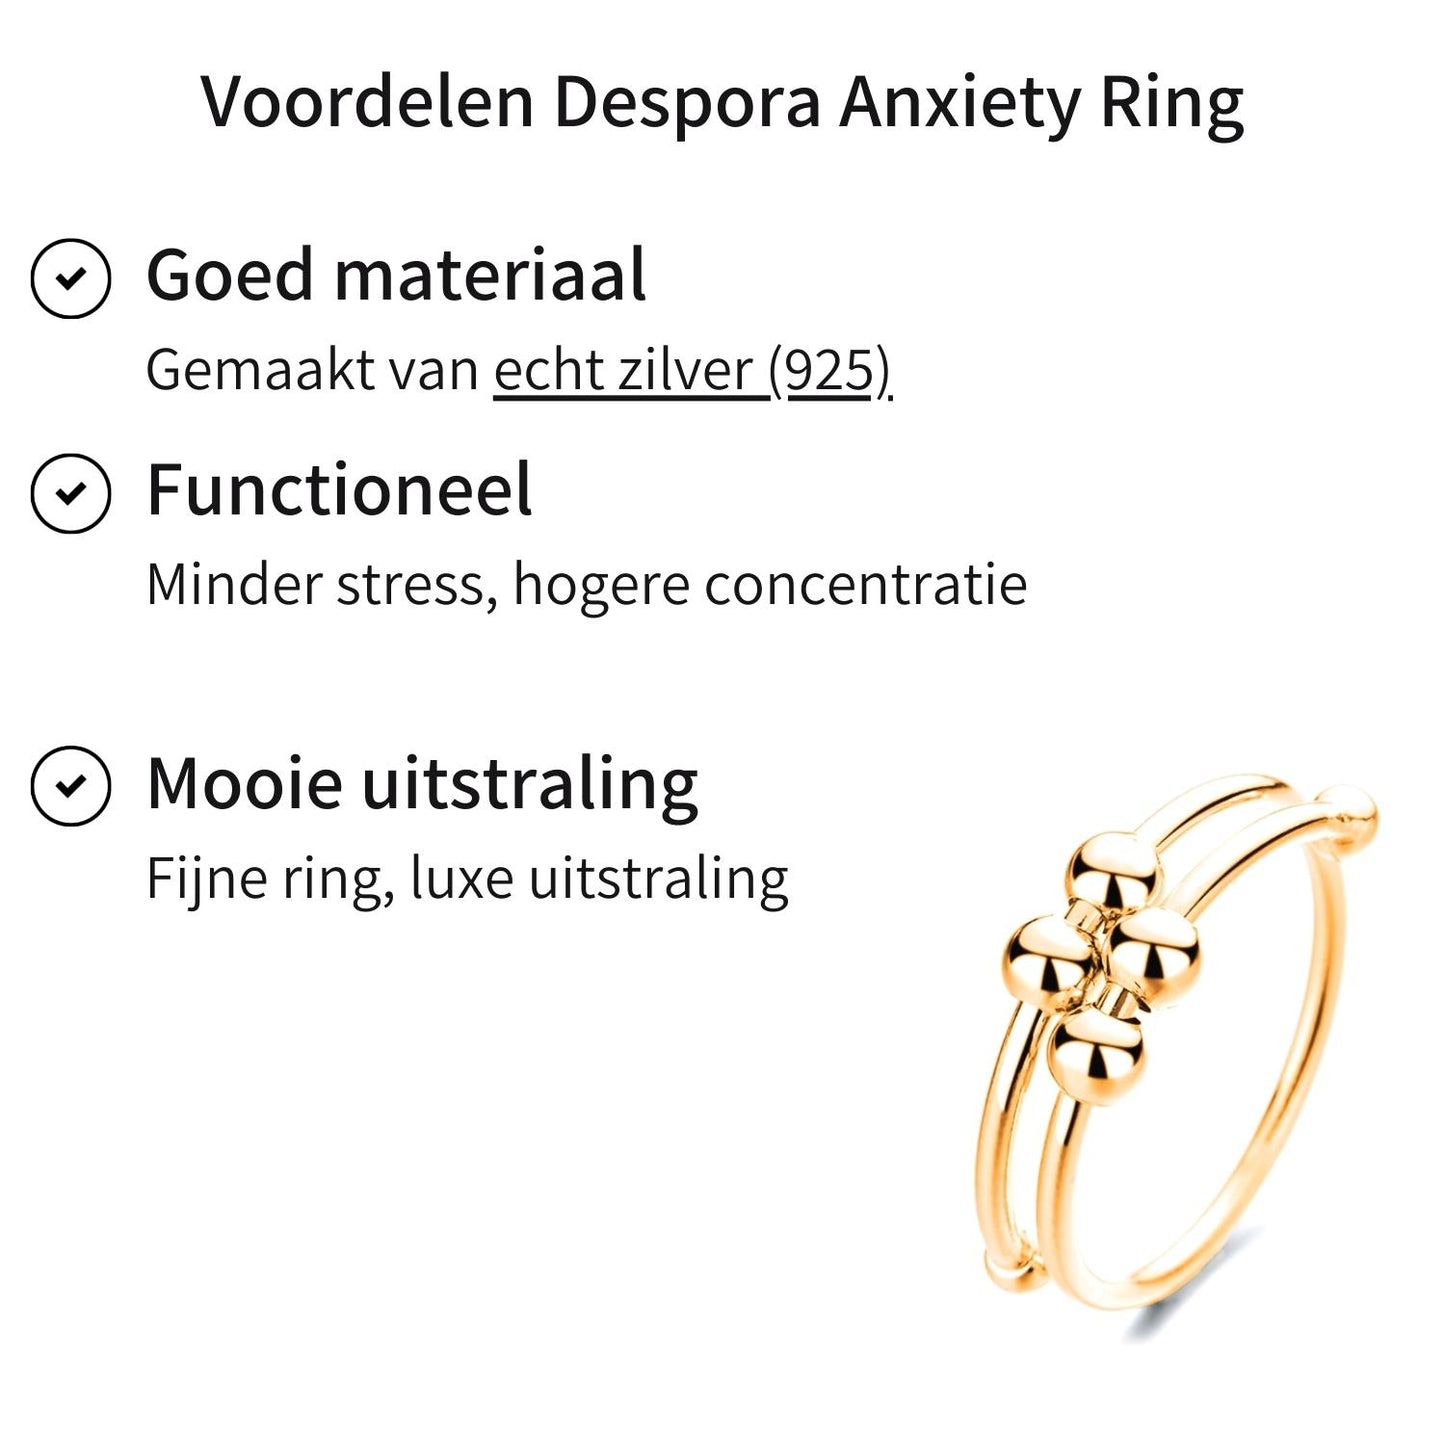 Anxiety Ring (dubbel) zilver 925 gold plated voordelen